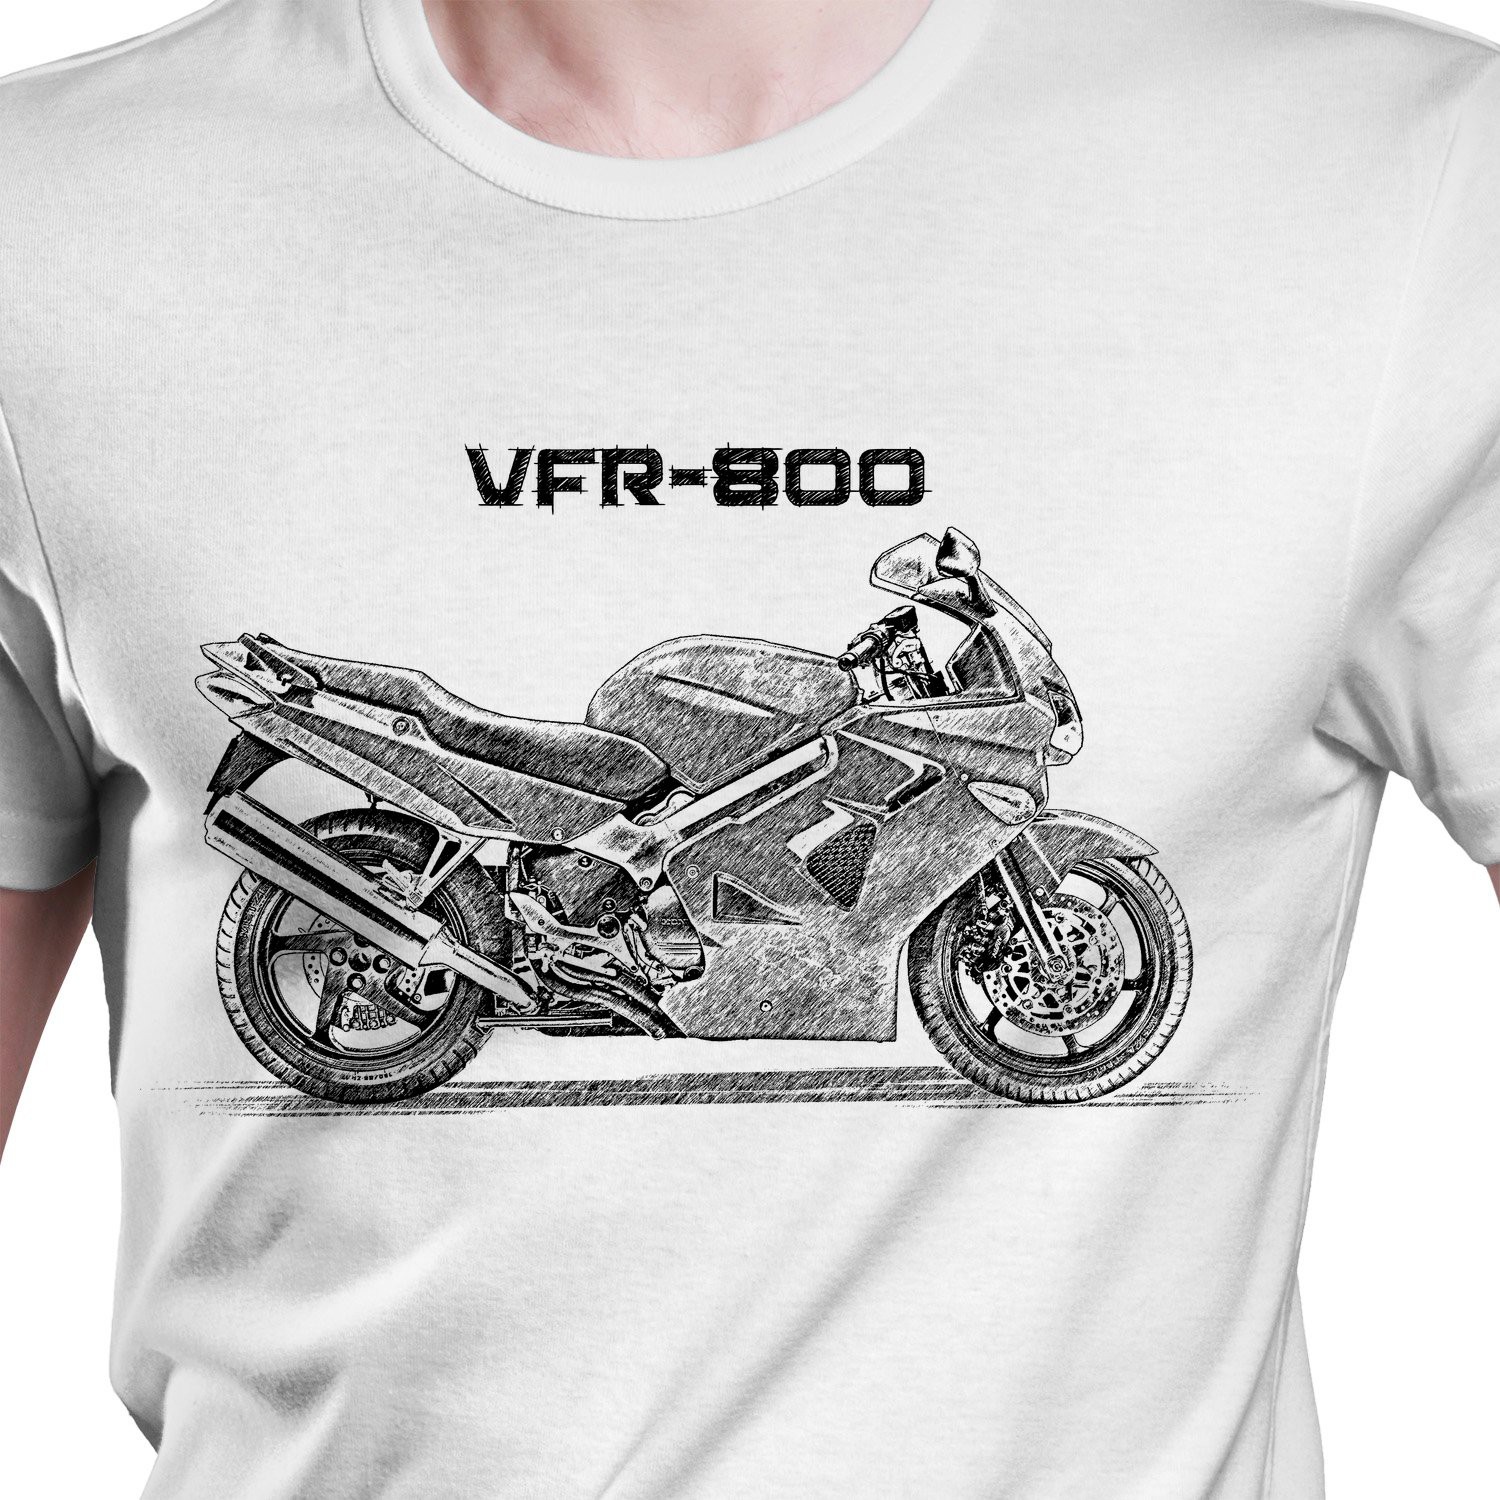 White T-shirt with Honda VFR-800. Gift for motorcyclist.